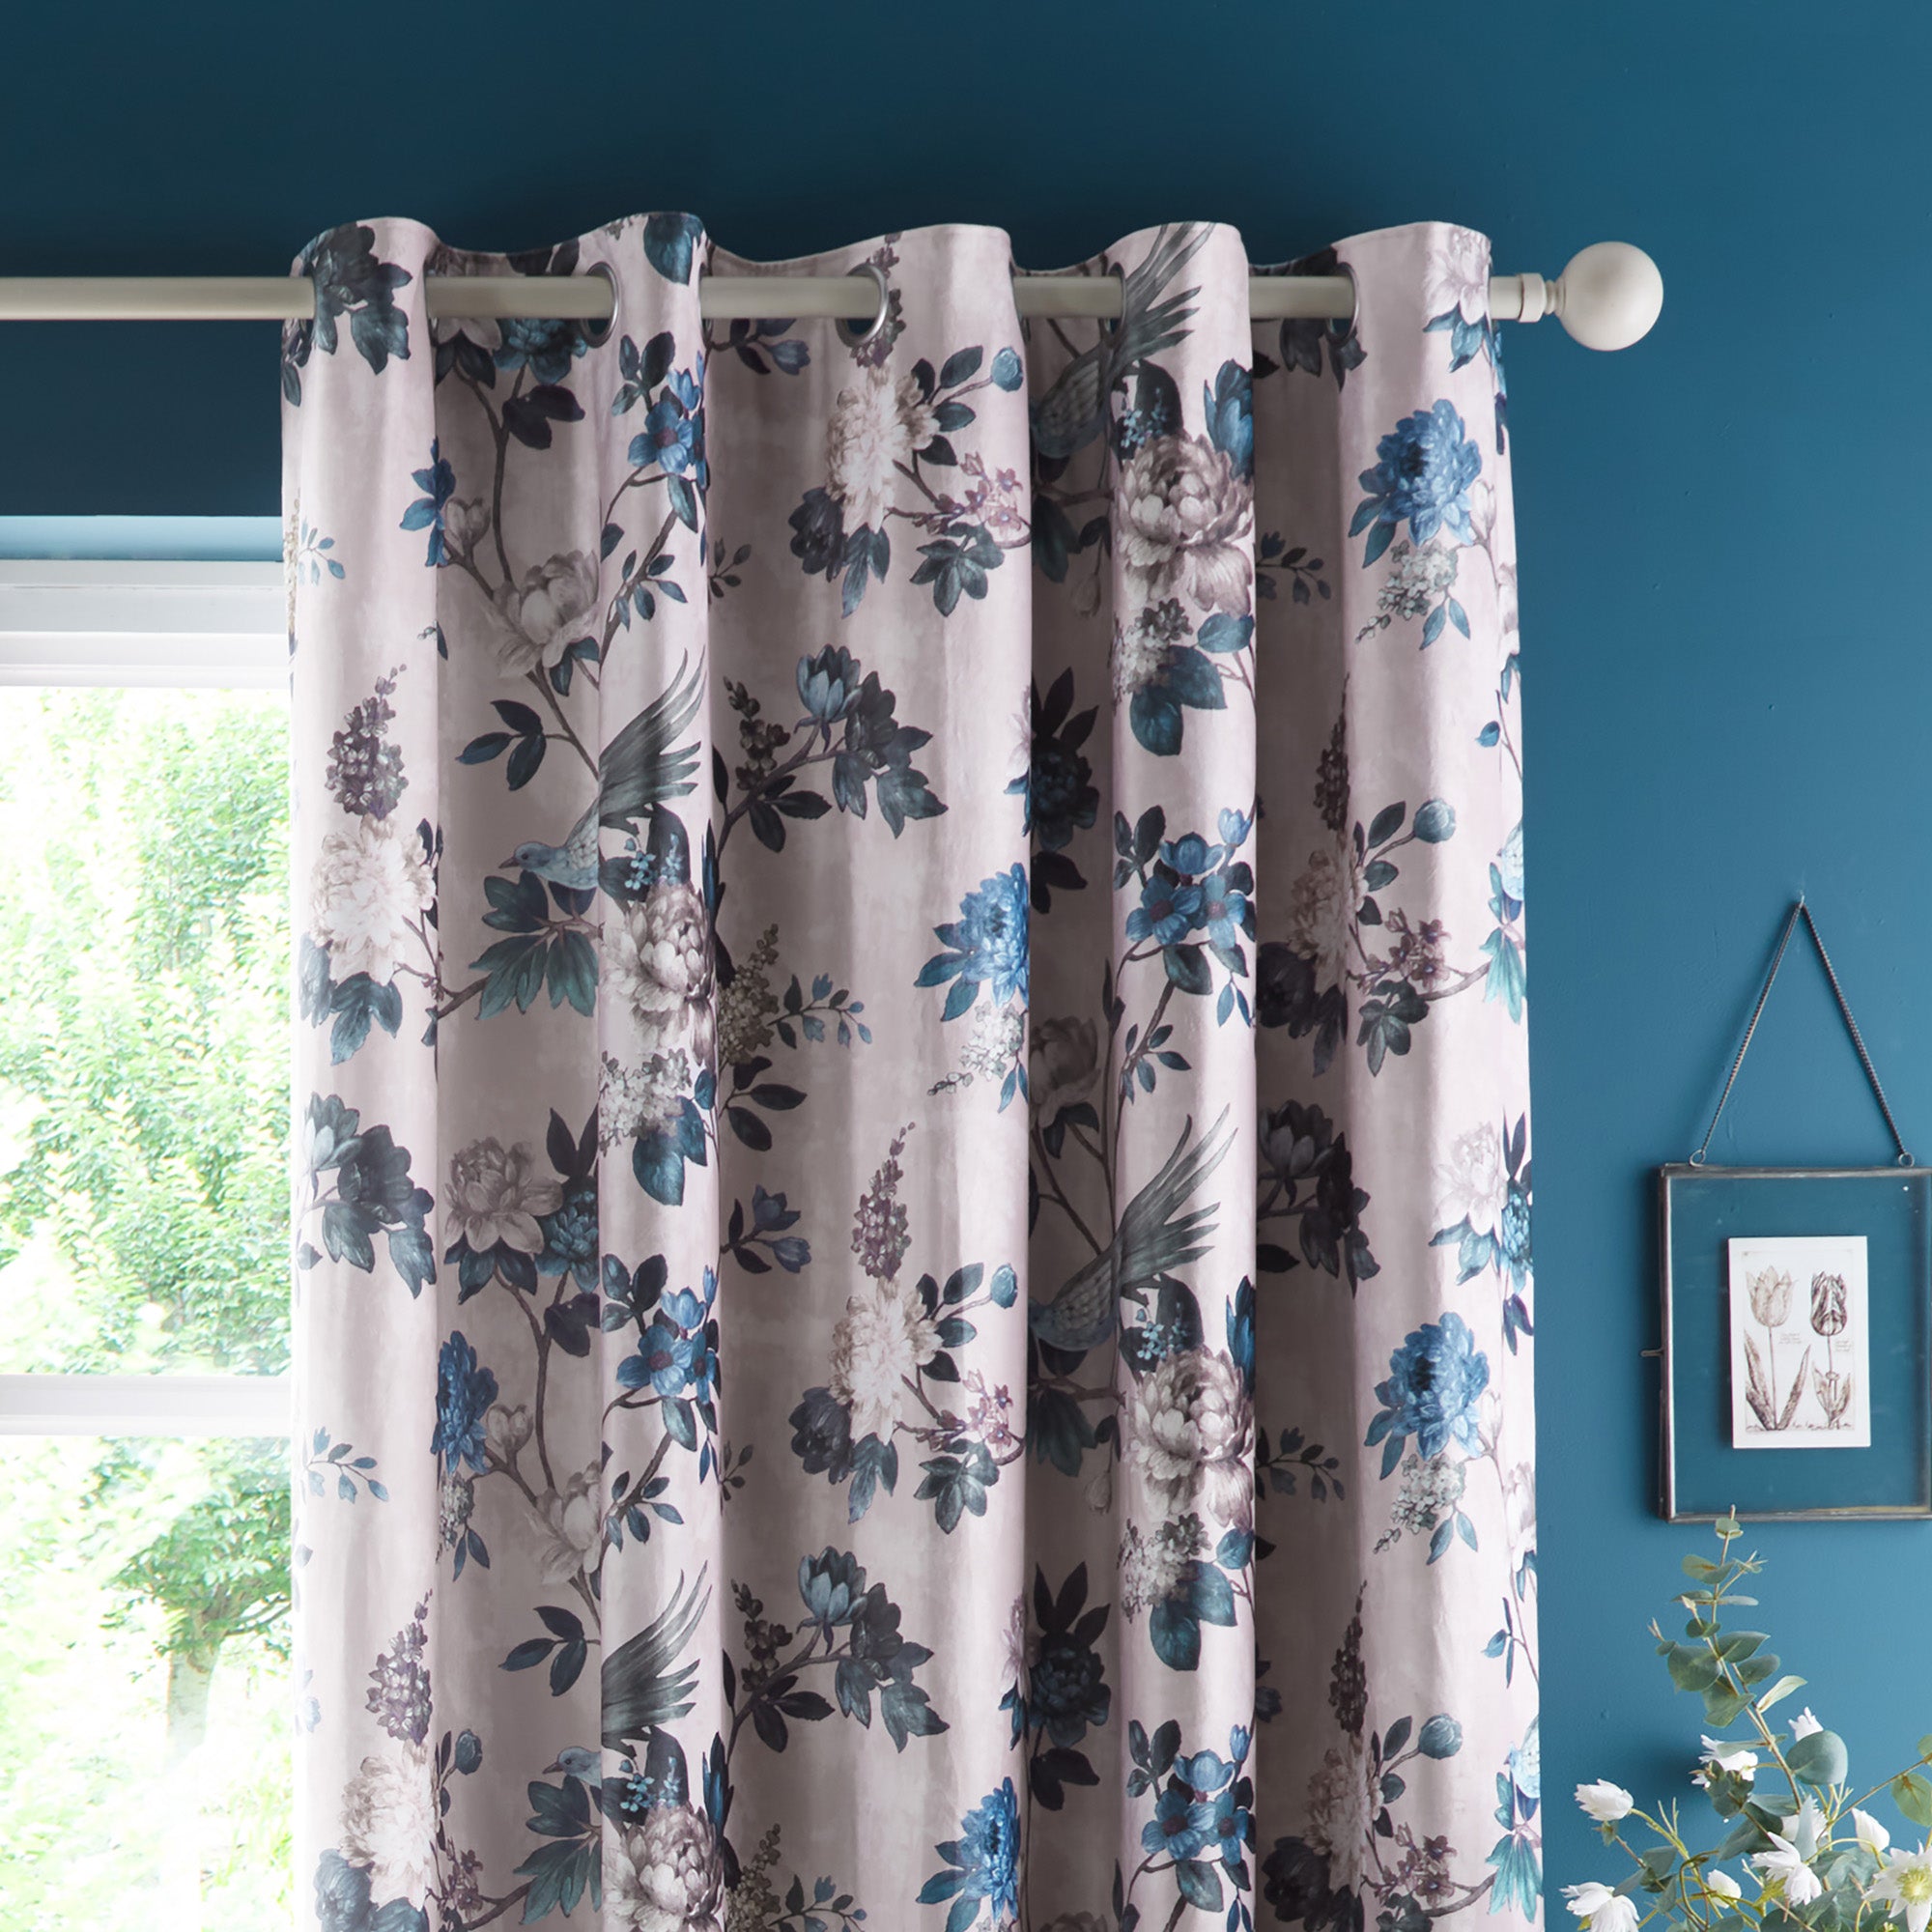 Windsford Pair of Eyelet Curtains by Appletree Heritage in Teal - Pair of Eyelet Curtains - Appletree Heritage